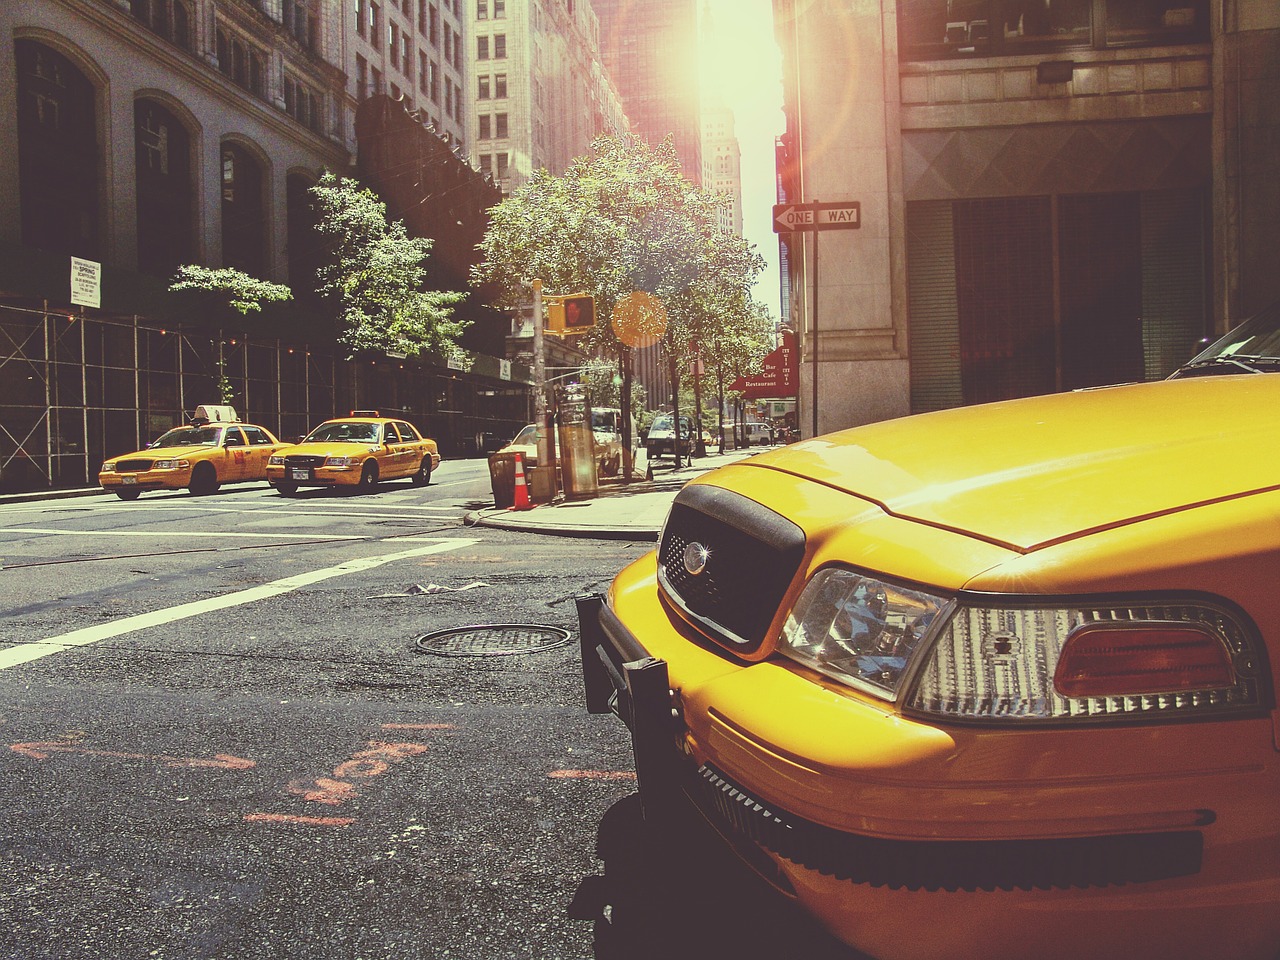 taxis in the city